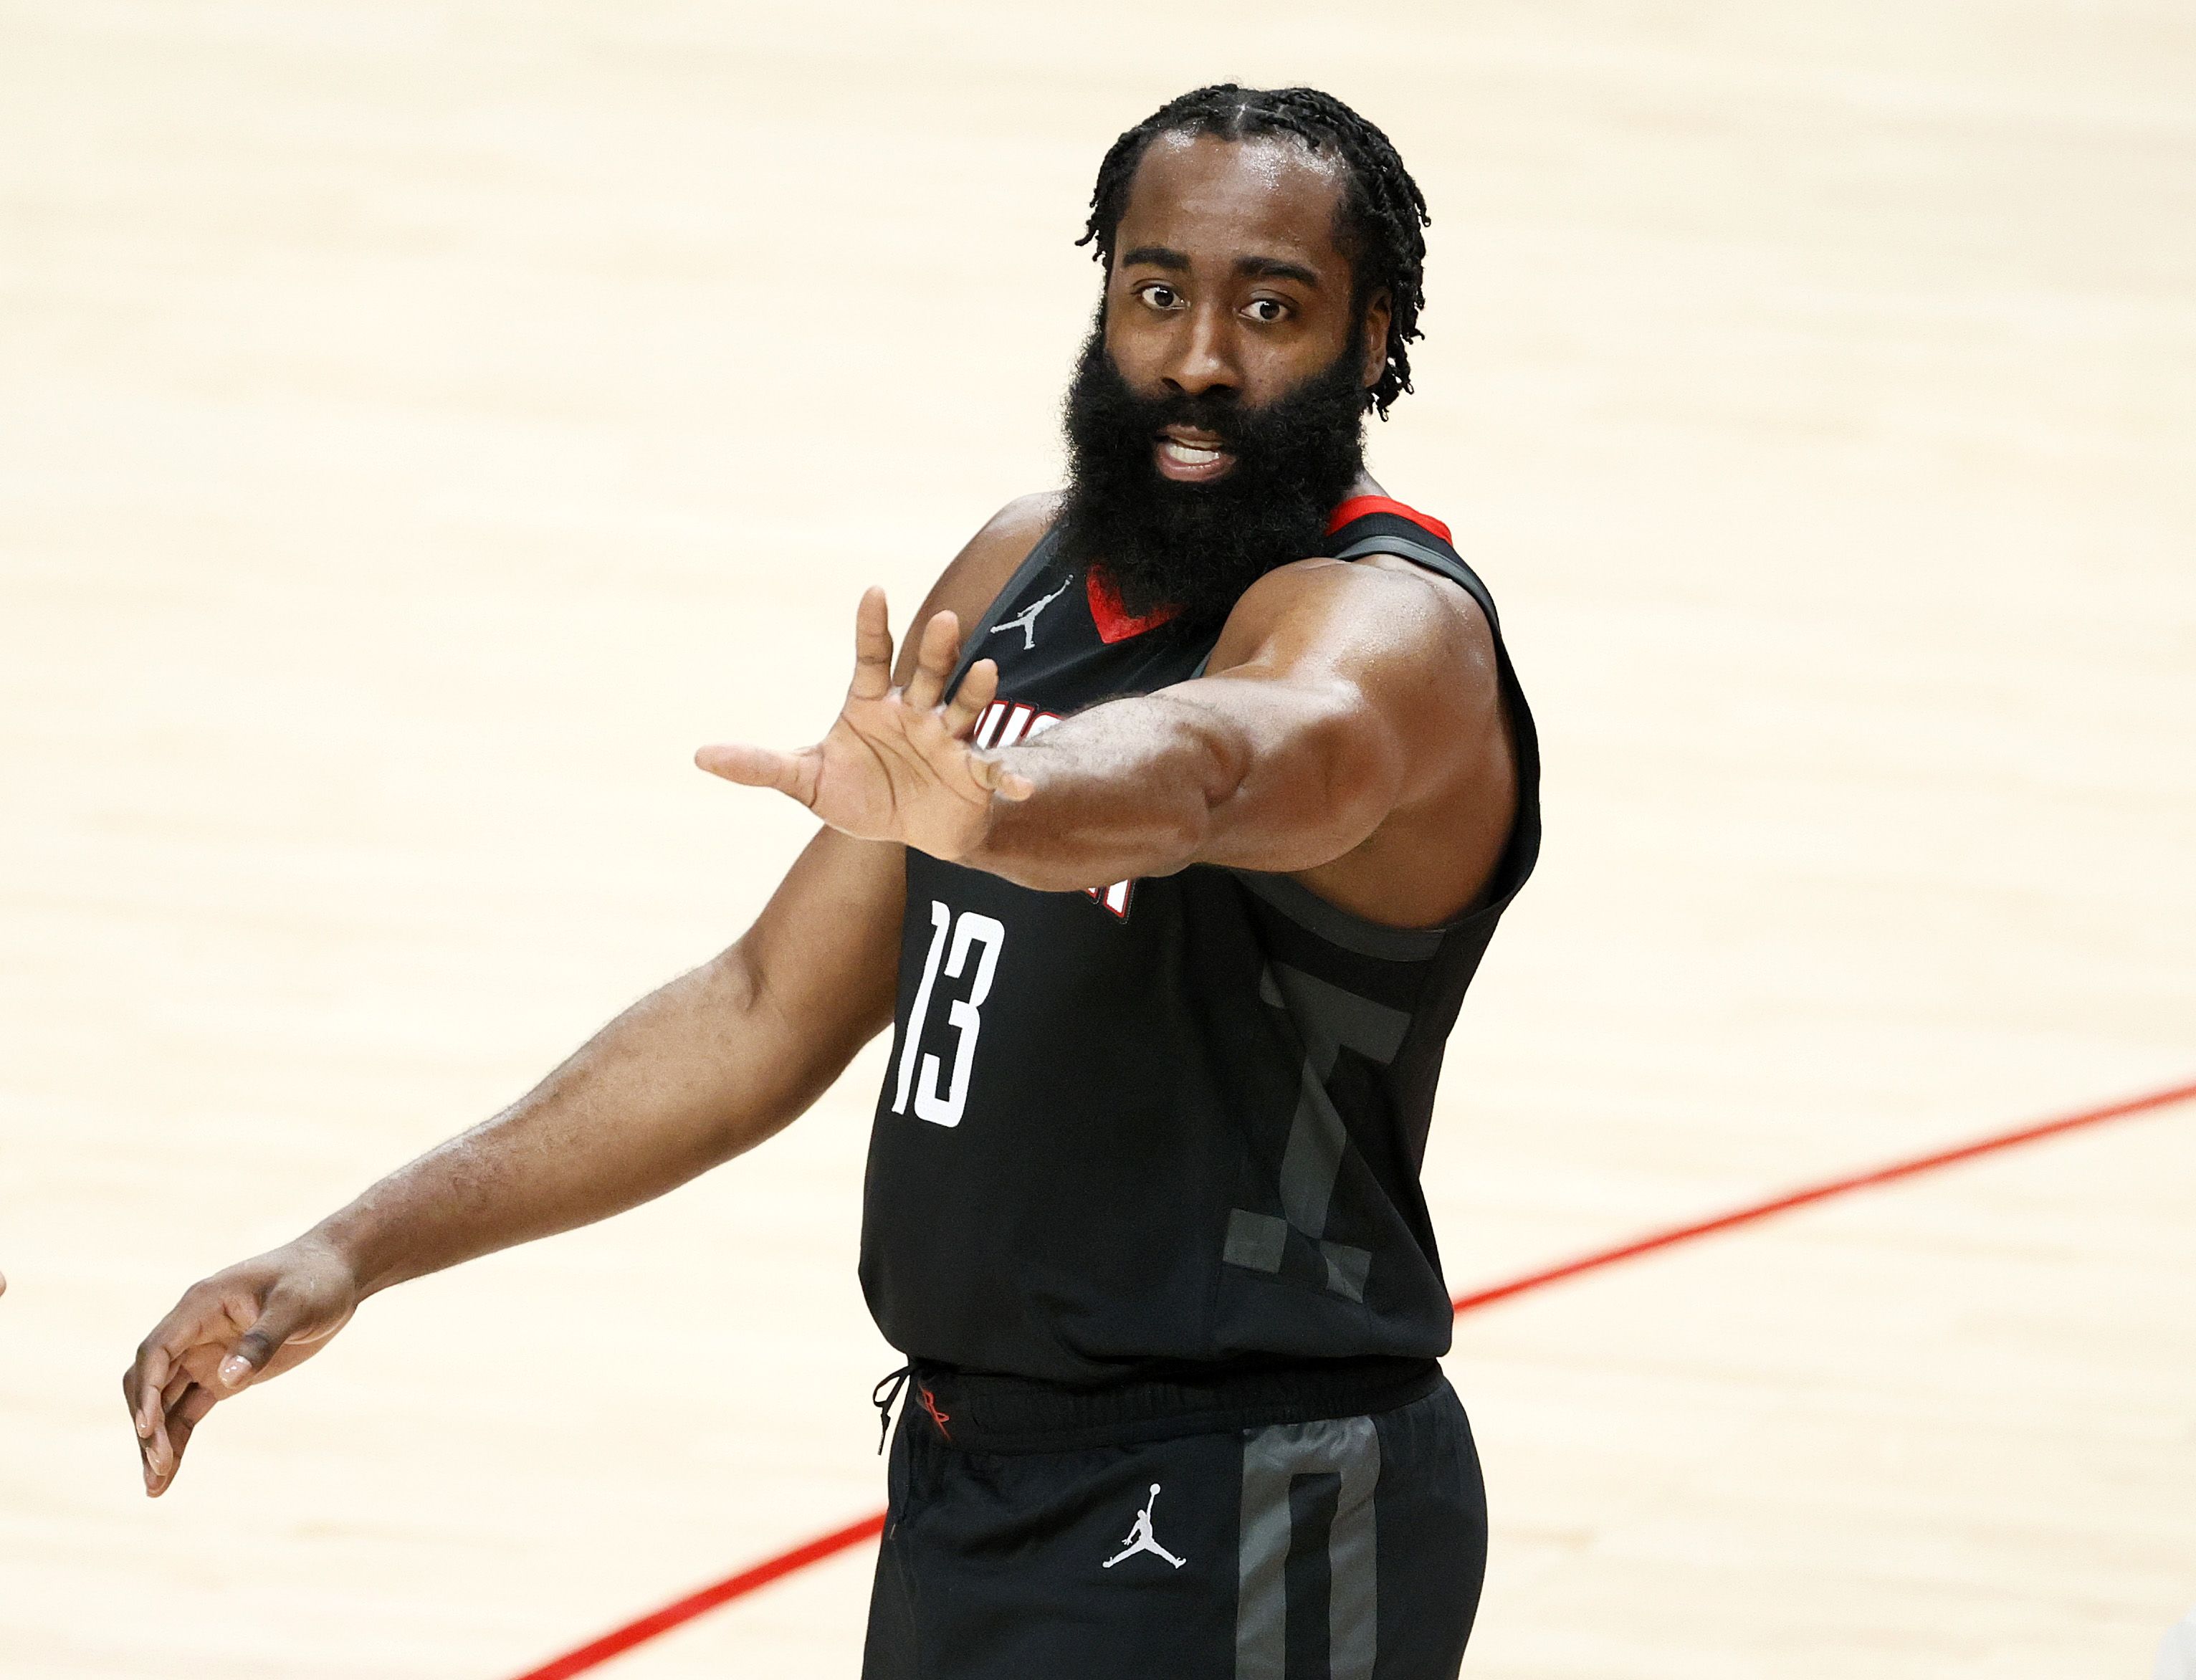 Can James Harden help the Brooklyn Nets win a championship?